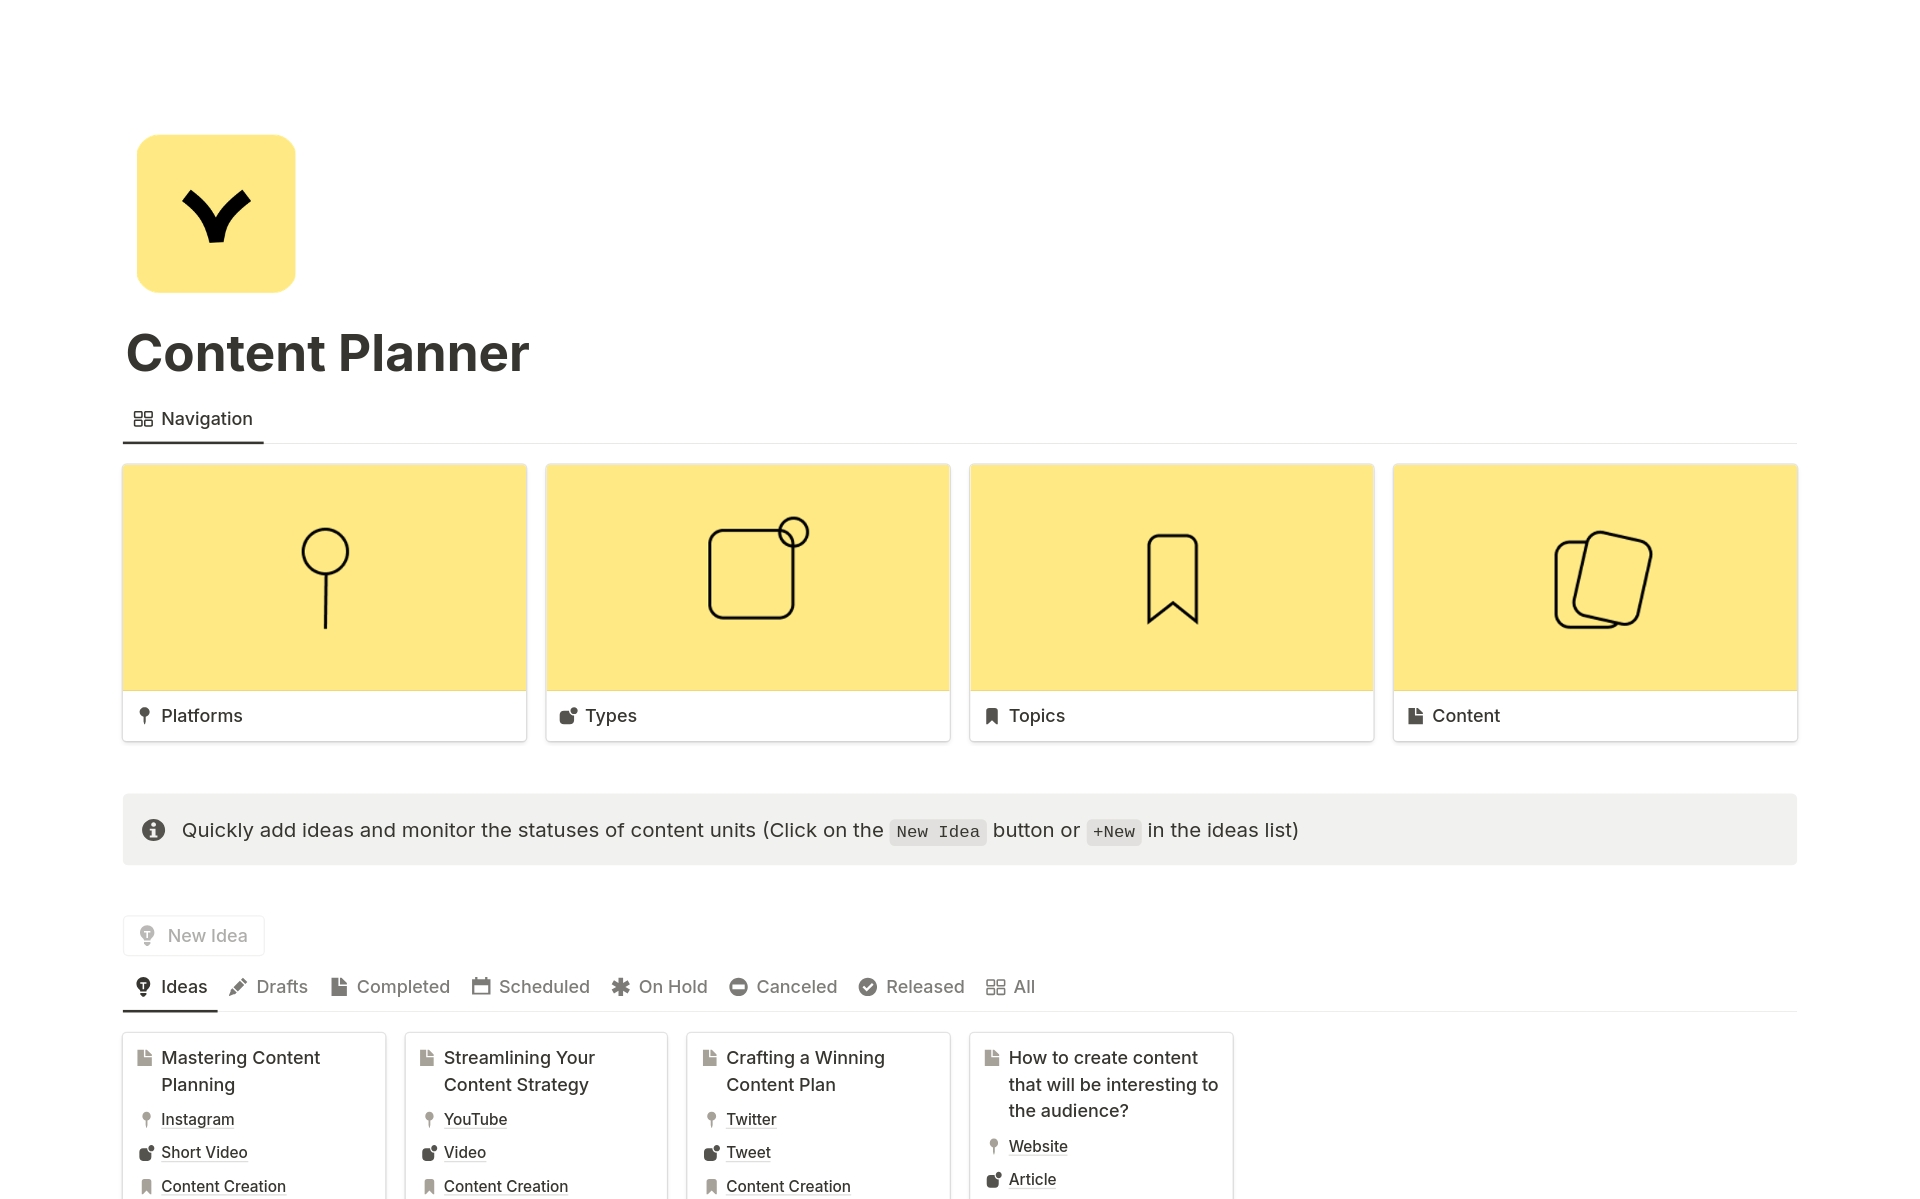 Content production isn't just about the release date. It's also necessary to schedule time for content creation. Use this template for planning: select platforms, quickly add ideas, set content creation dates, and plan releases in the calendar ✨